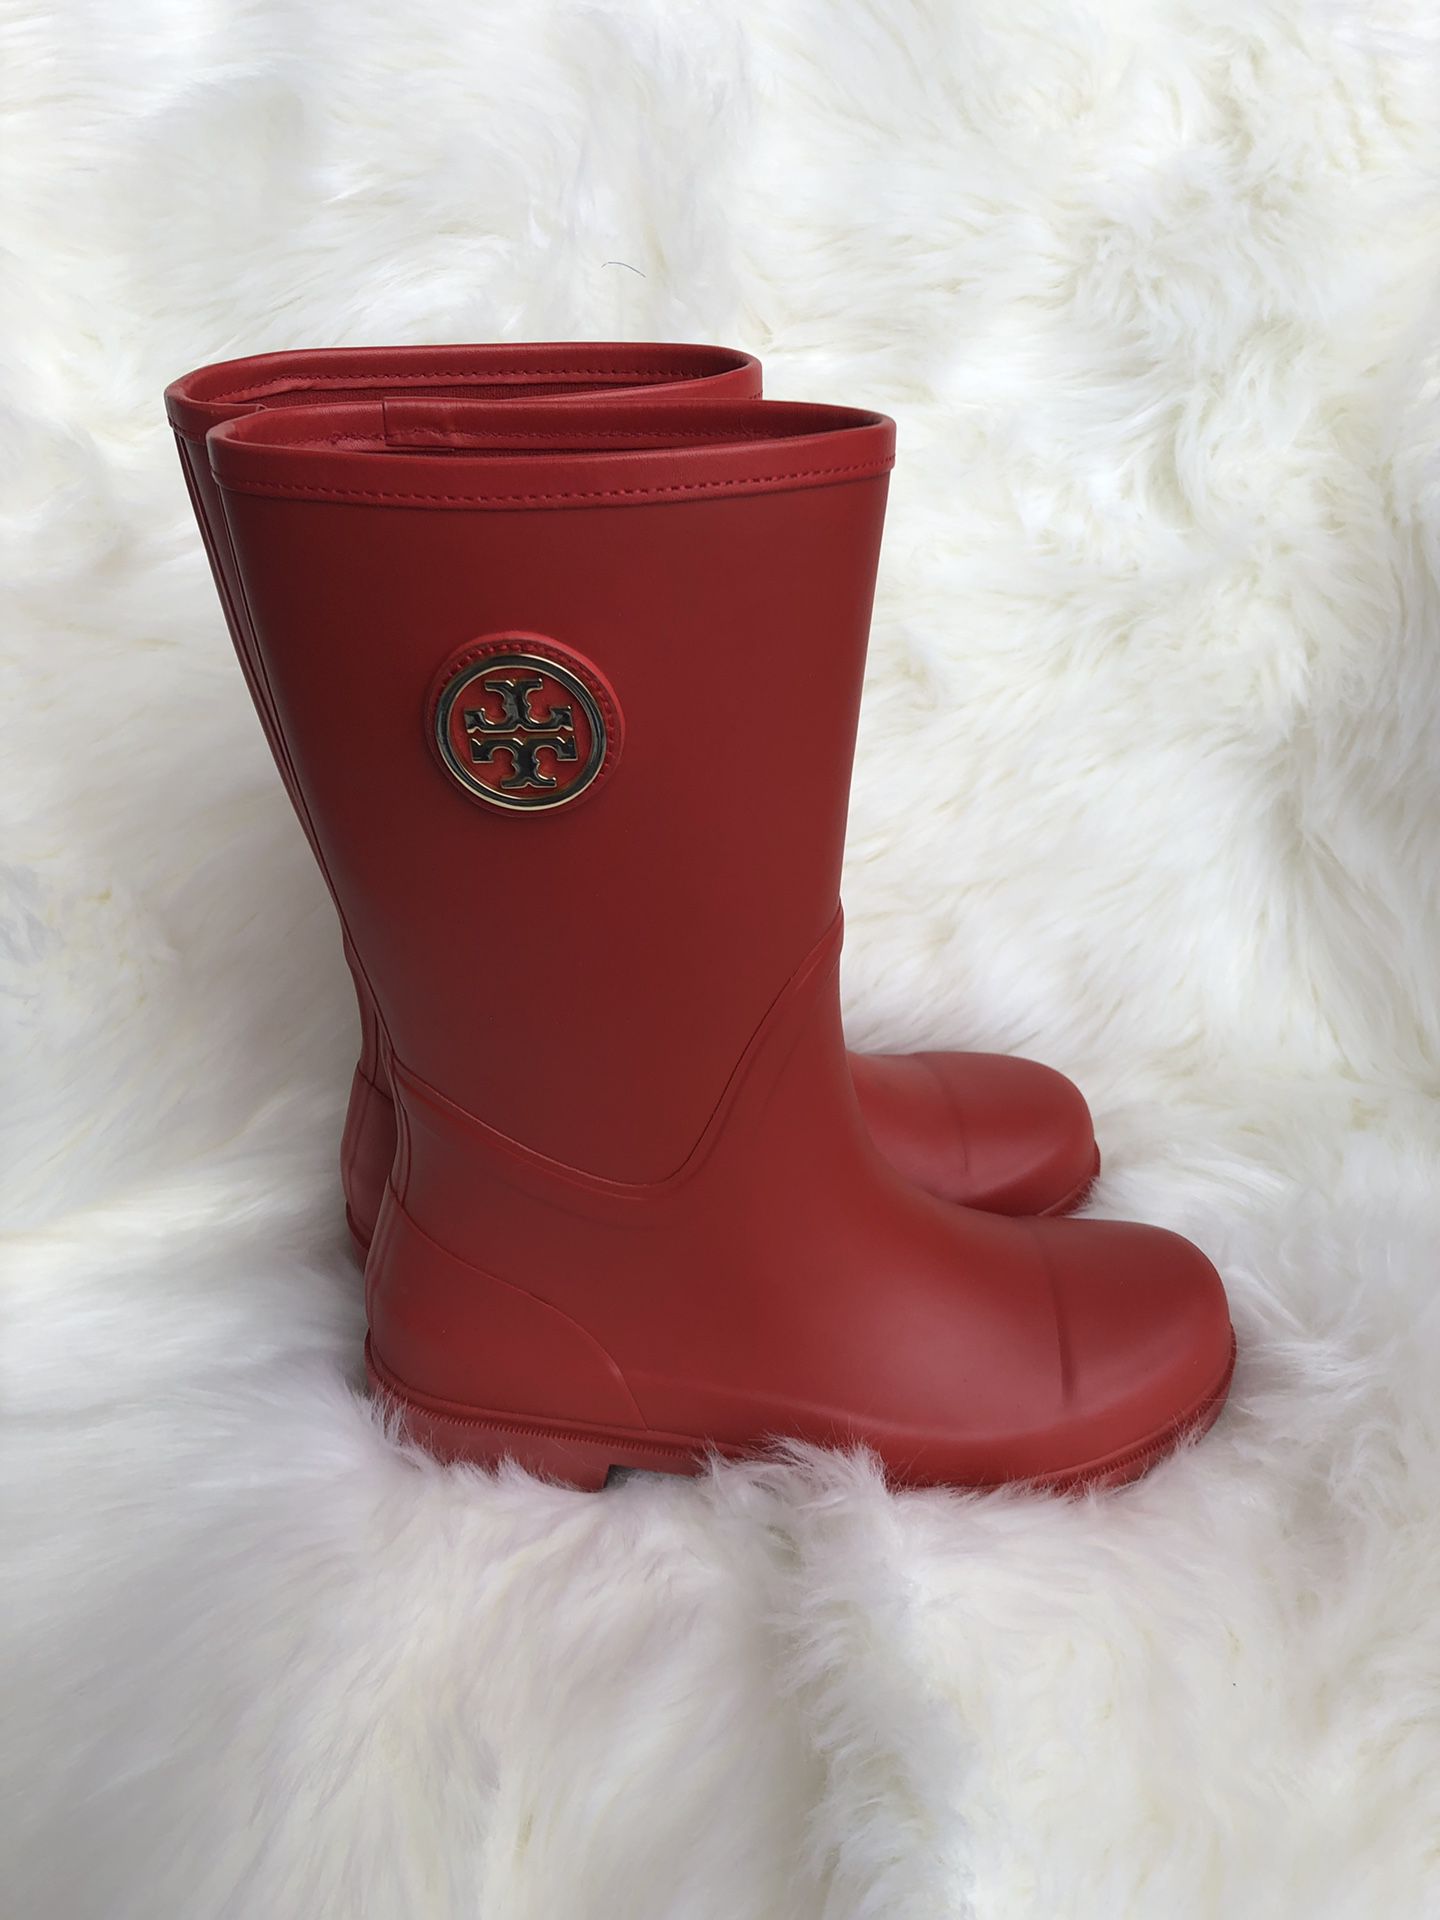 Tory Burch Rubber Red Rain boots for Sale in Frisco, TX - OfferUp